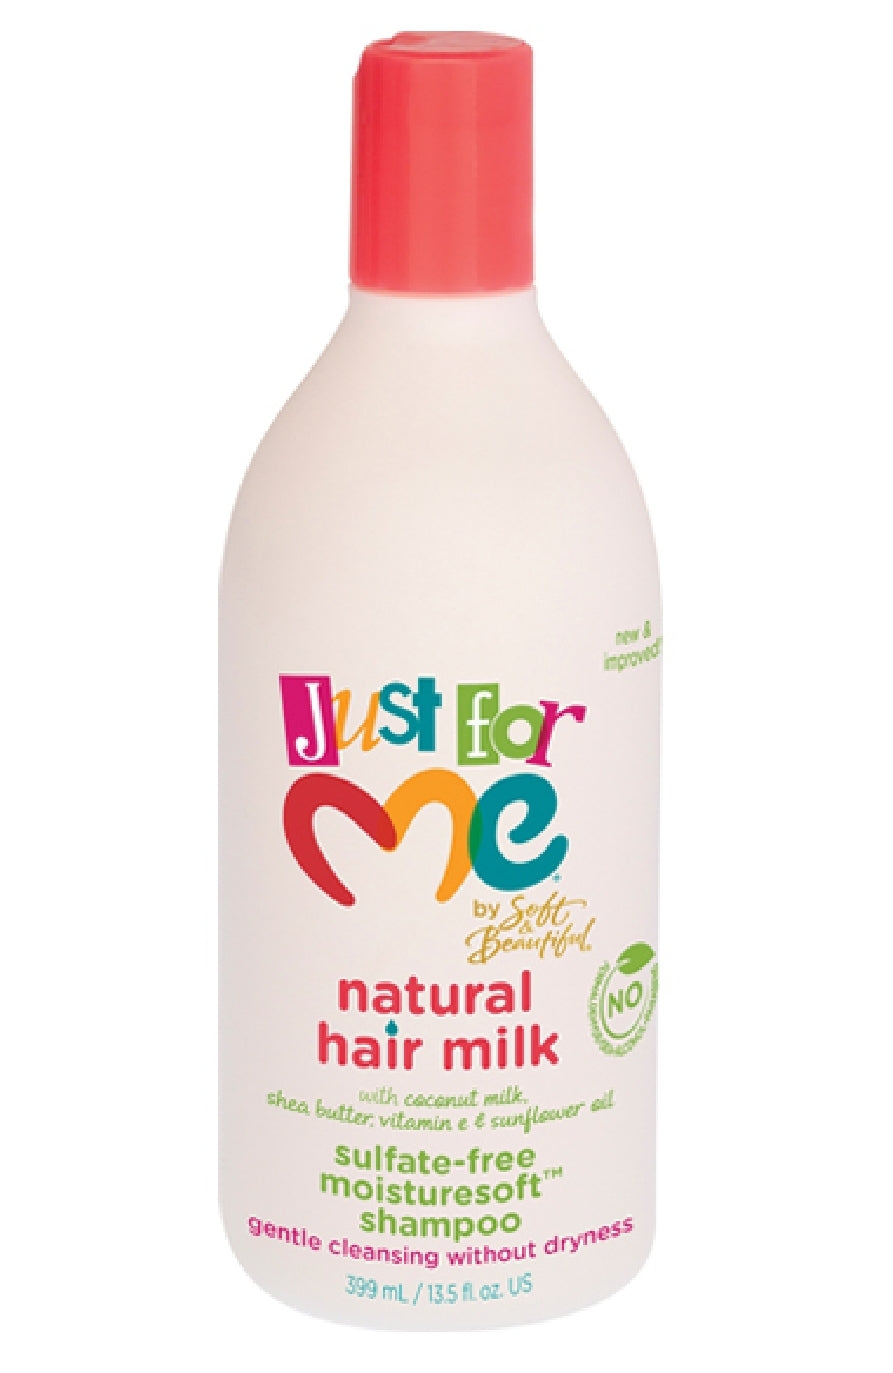 JUST FOR ME- NATURAL HAIR MILK SHAMPOO